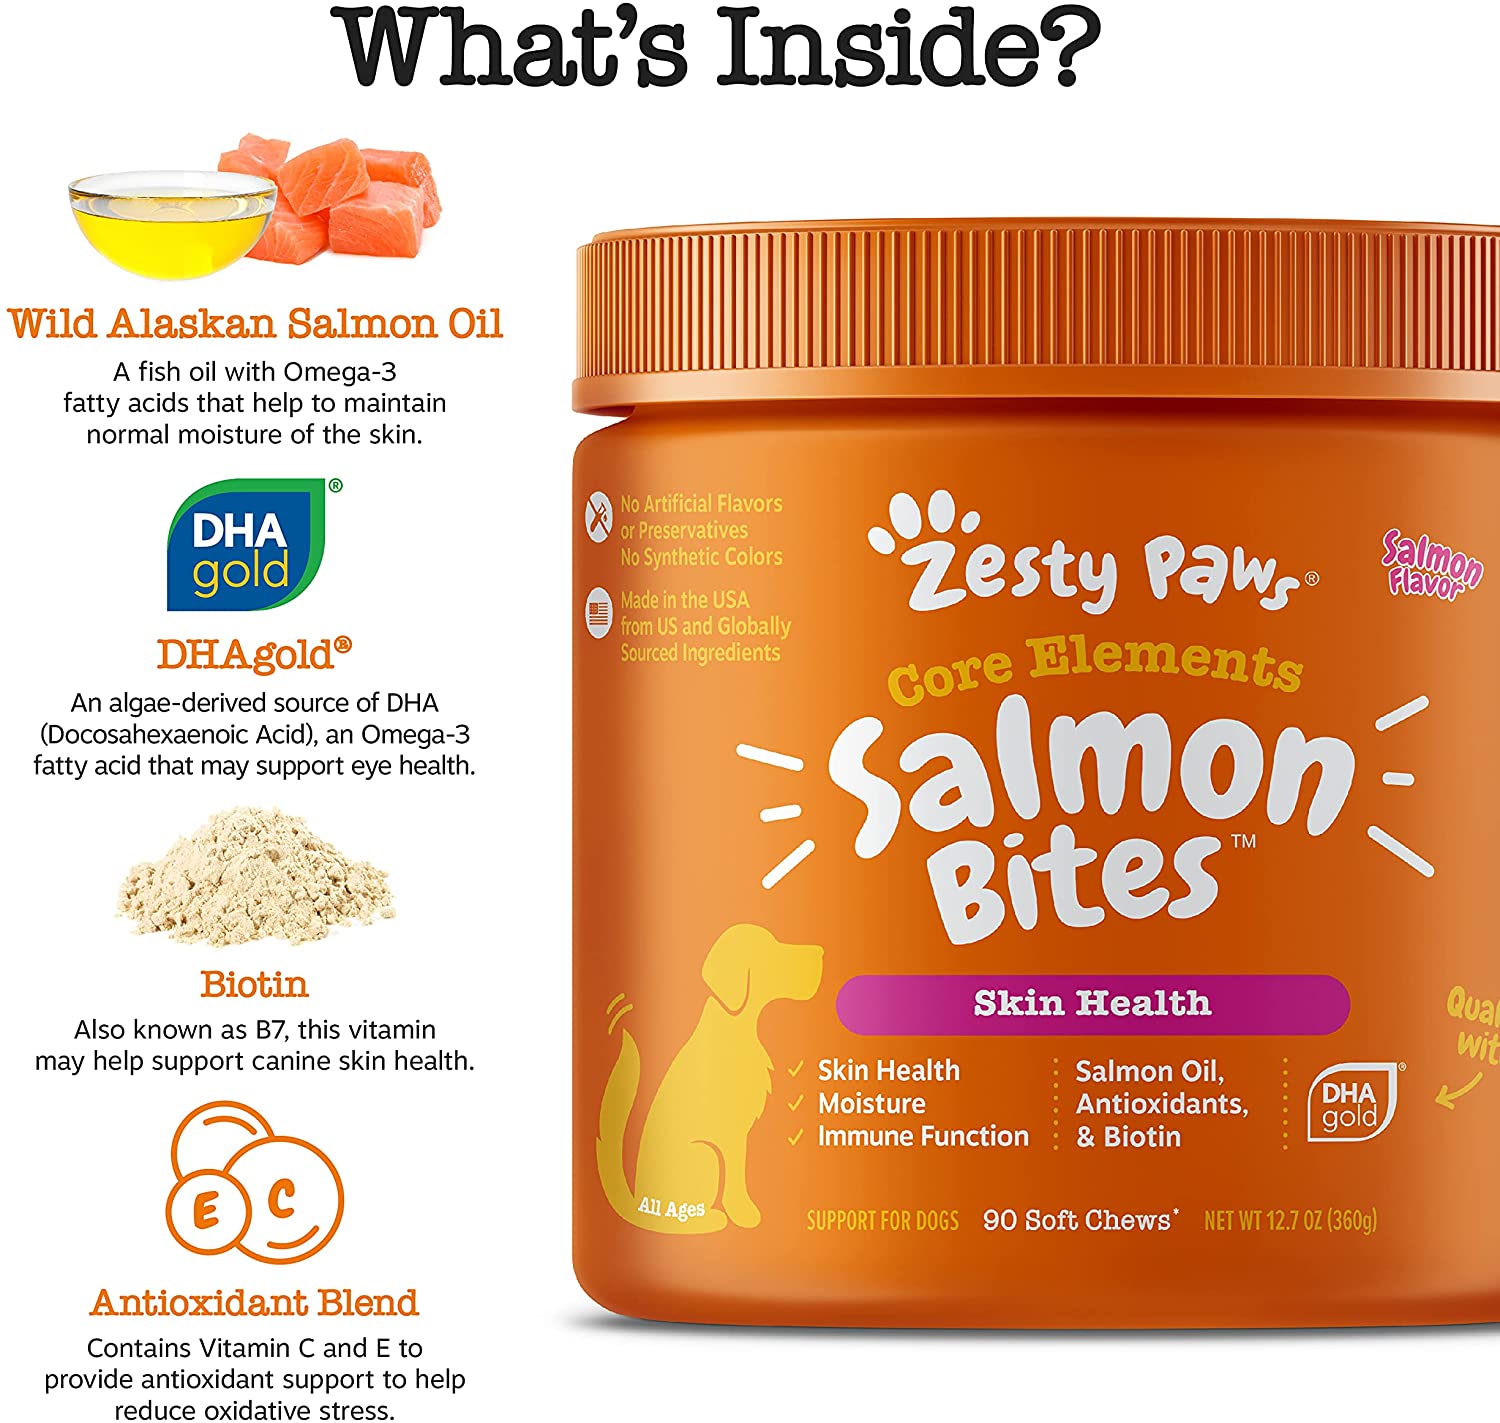 Zesty Paws Salmon Fish Oil Omega 3 for Dogs - with Wild Alaskan Salmon Oil - Anti Itch Skin & Coat + Allergy Support - Hip & Joint + Arthritis Dog Supplement + EPA & DHA